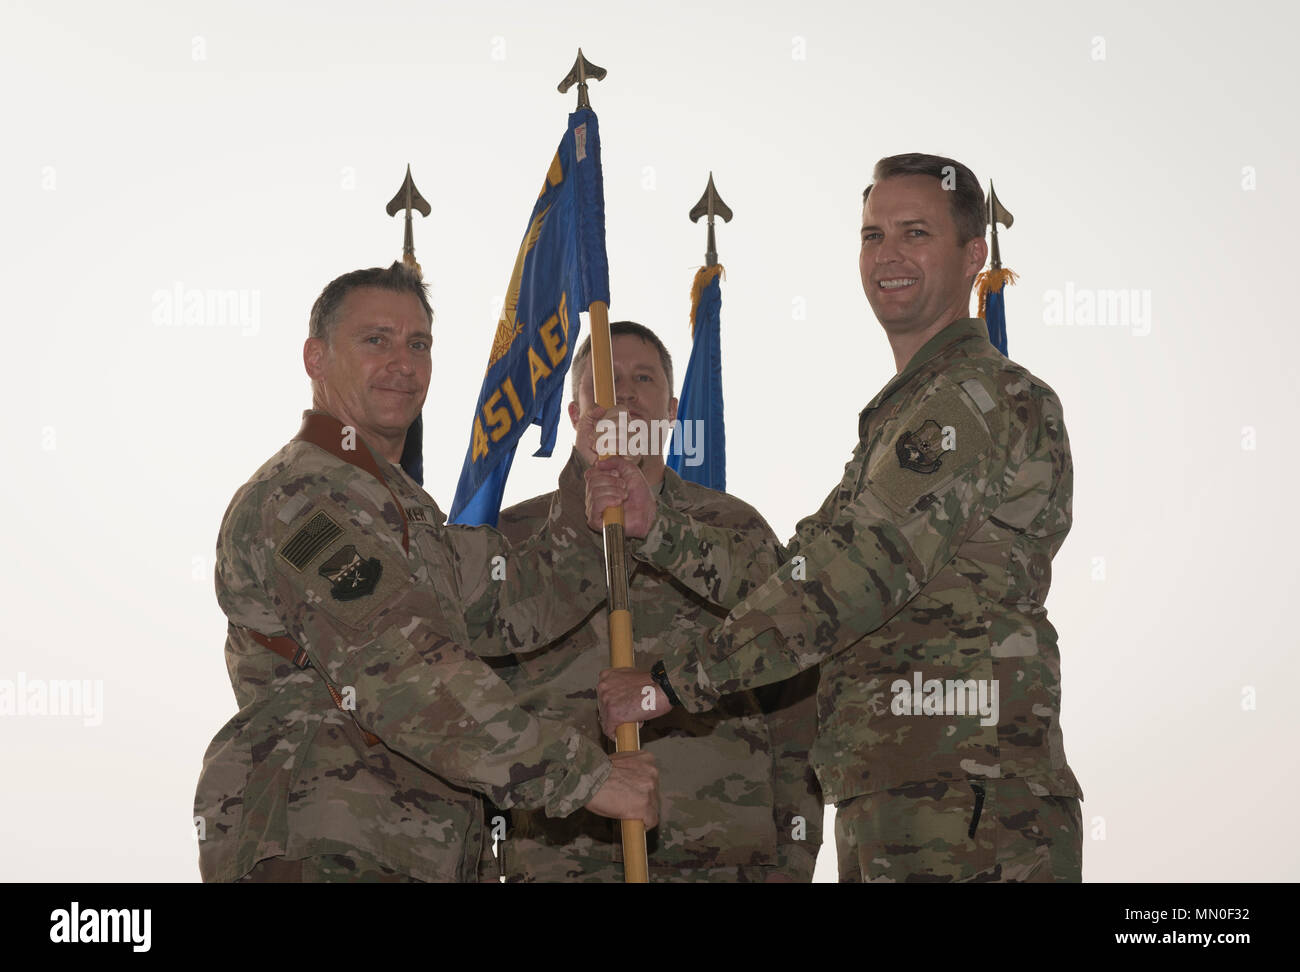 Col. Steve Jones, the incoming 451st Air Expeditionary Group commander, receives the 451st AEG guidon from Brig. Gen. Craig Baker, the 455th Air Expeditionary Wing commander, during the 451st AEG change of command ceremony at Kandahar Airfield, Afghanistan, Aug. 2, 2017. Jones is a command pilot with more than 3,400 flying hours and has flown the B-1B Lancer, MQ-1 Predator and MQ-9 Reaper. (U.S. Air Force photo by Staff Sgt. Benjamin Gonsier) Stock Photo